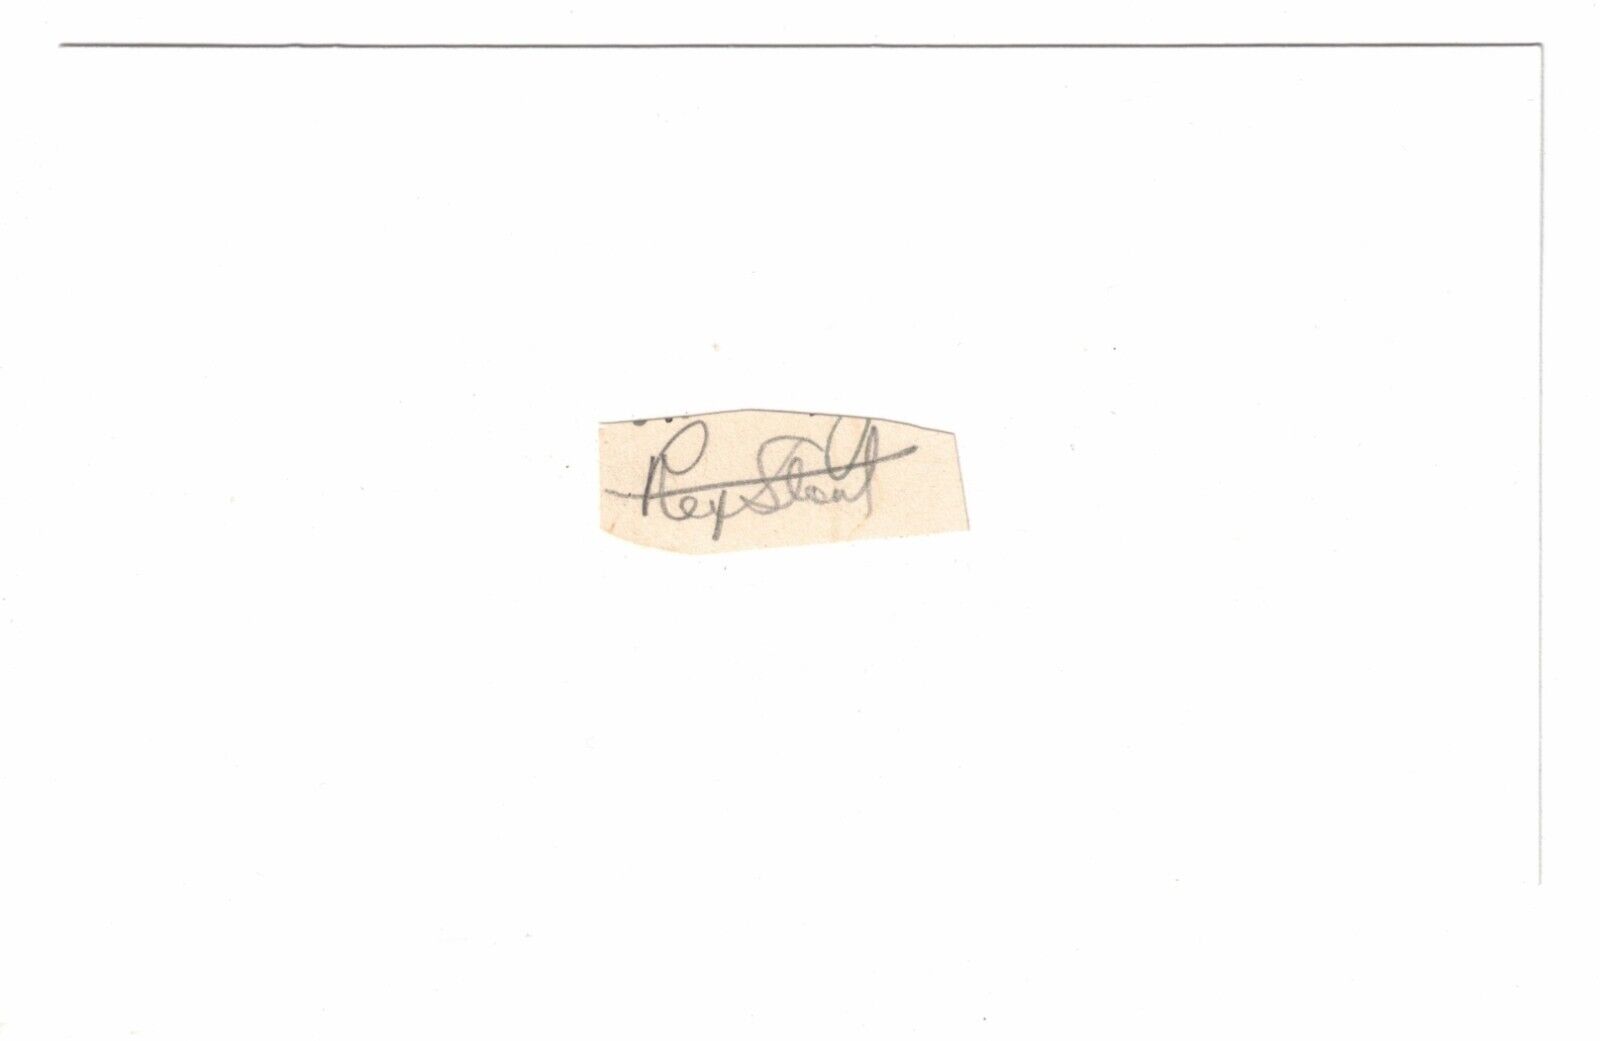 Rex Stout HAND SIGNED Cut Autograph Index Card Signed Author Nero Wolfe